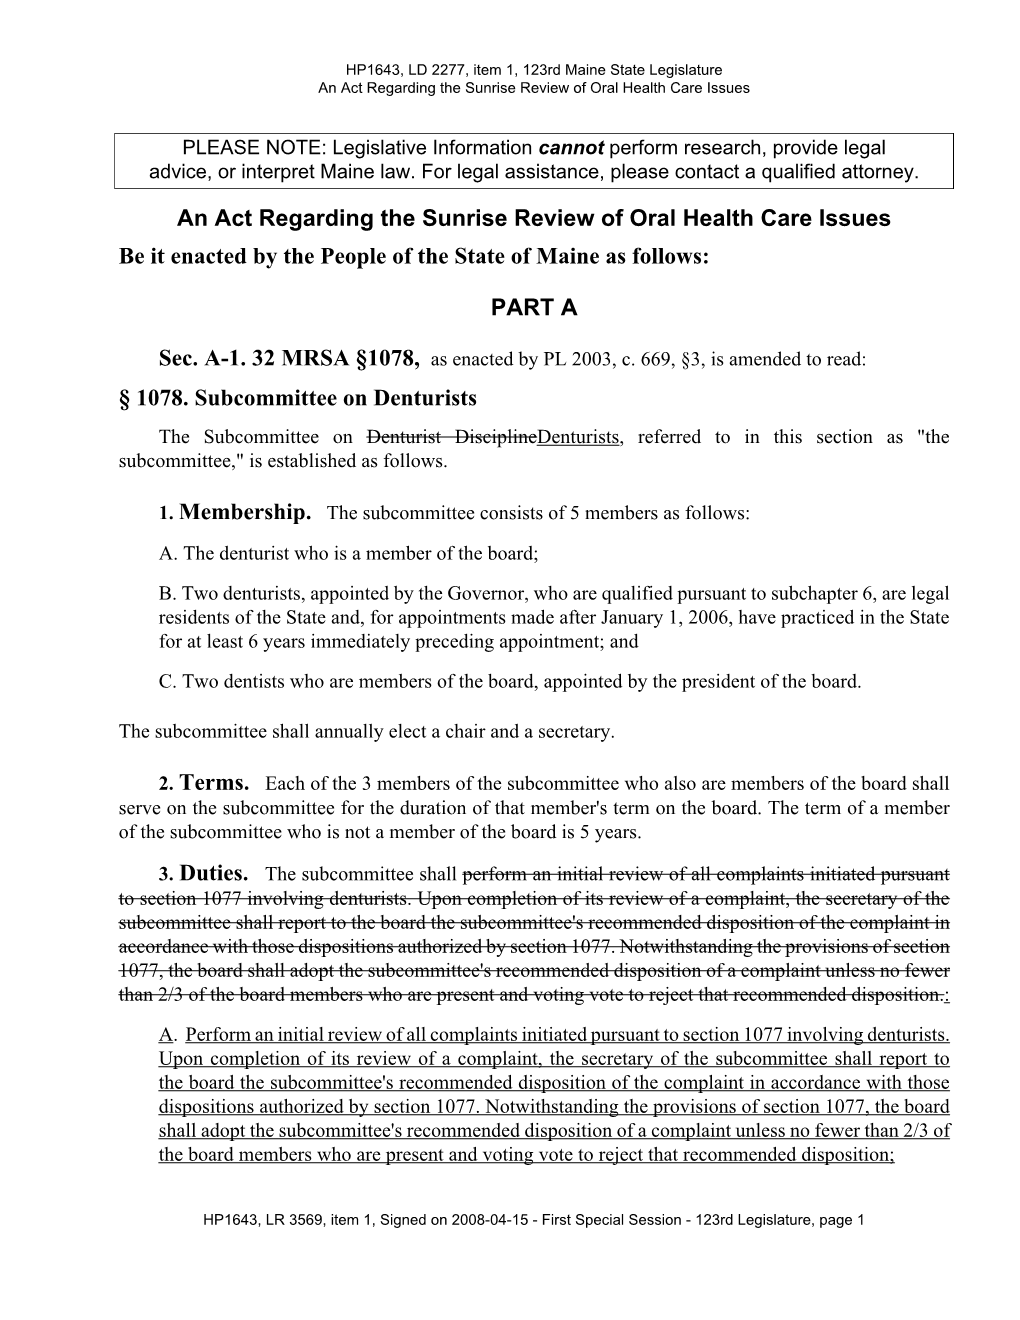 An Act Regarding the Sunrise Review of Oral Health Care Issues